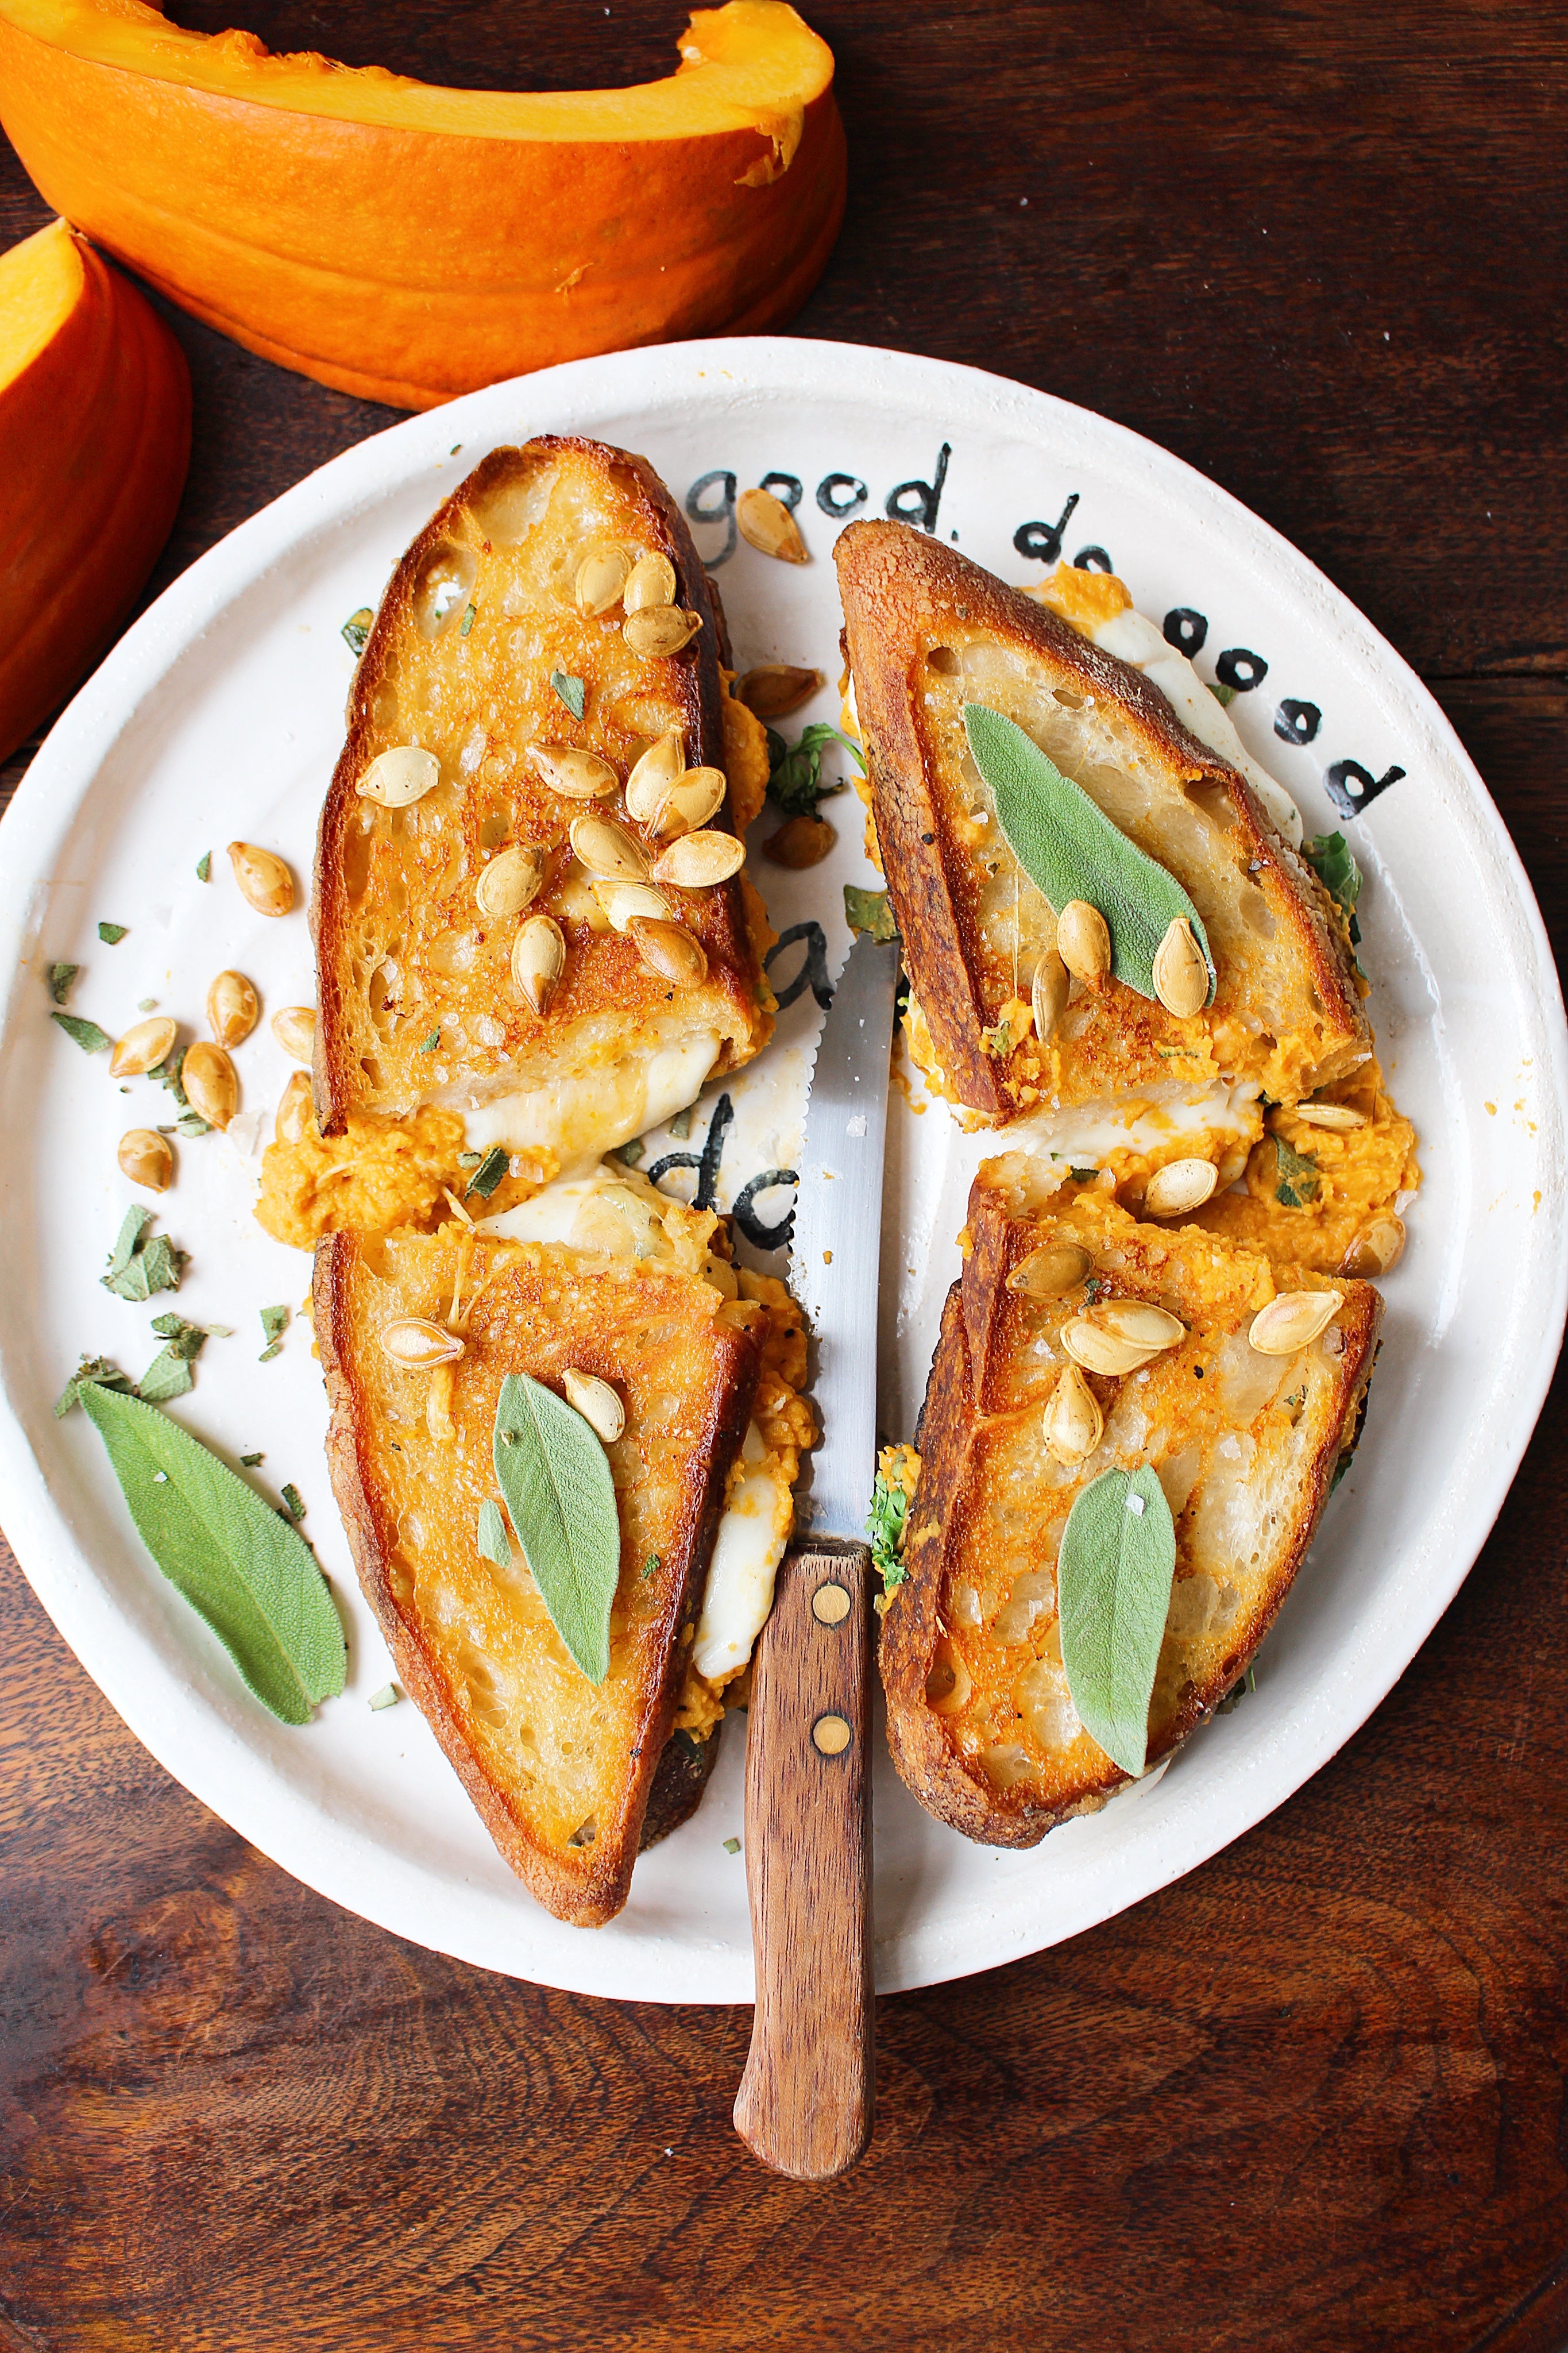 Pumpkin is also great in houmous... and grilled cheese sandwiches